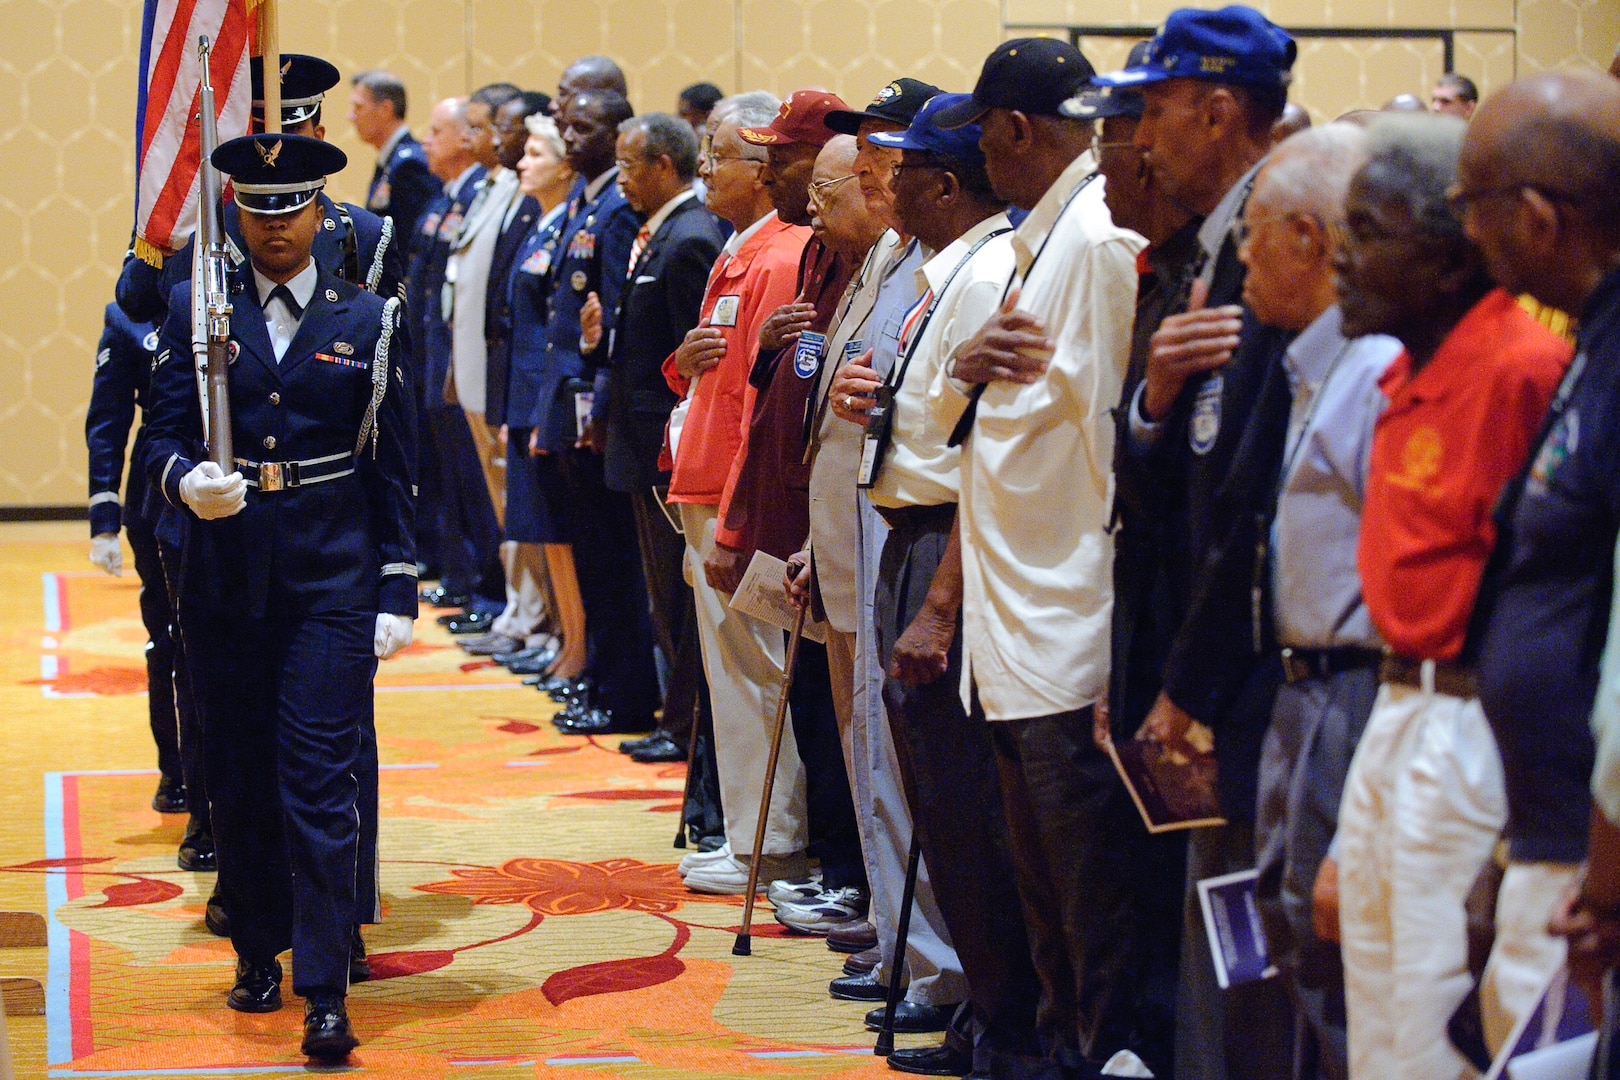 Members of the Randolph Honor Guard post the colors at the beginning of the 39th Tuskegee Airmen convention, held in downtown San Antonio, Texas.  Tuskegee Airmen honor the flag prior to the Lonely Eagles Ceremony July 29.  The ceremony recognizes Tuskegee Airmen who died during the past year. (U.S. Air Force photo/Steve Thurow)